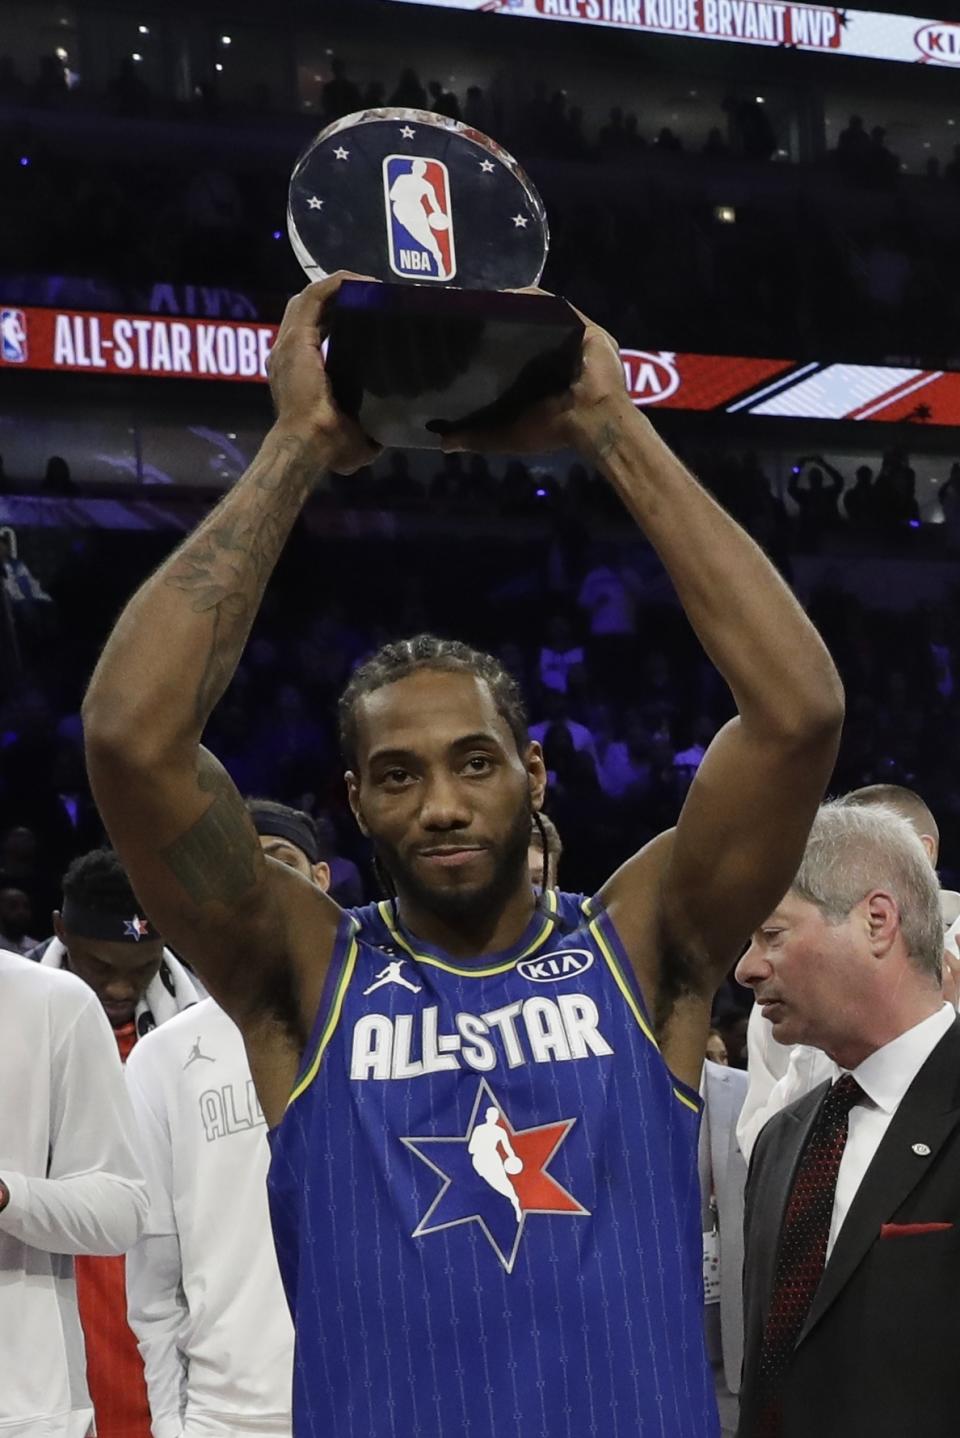 Kawhi Leonard of the Los Angeles Clippers holds up his NBA All-Star Game Kobe Bryant MVP Award after the NBA All-Star basketball game Sunday, Feb. 16, 2020, in Chicago. (AP Photo/Nam Huh)